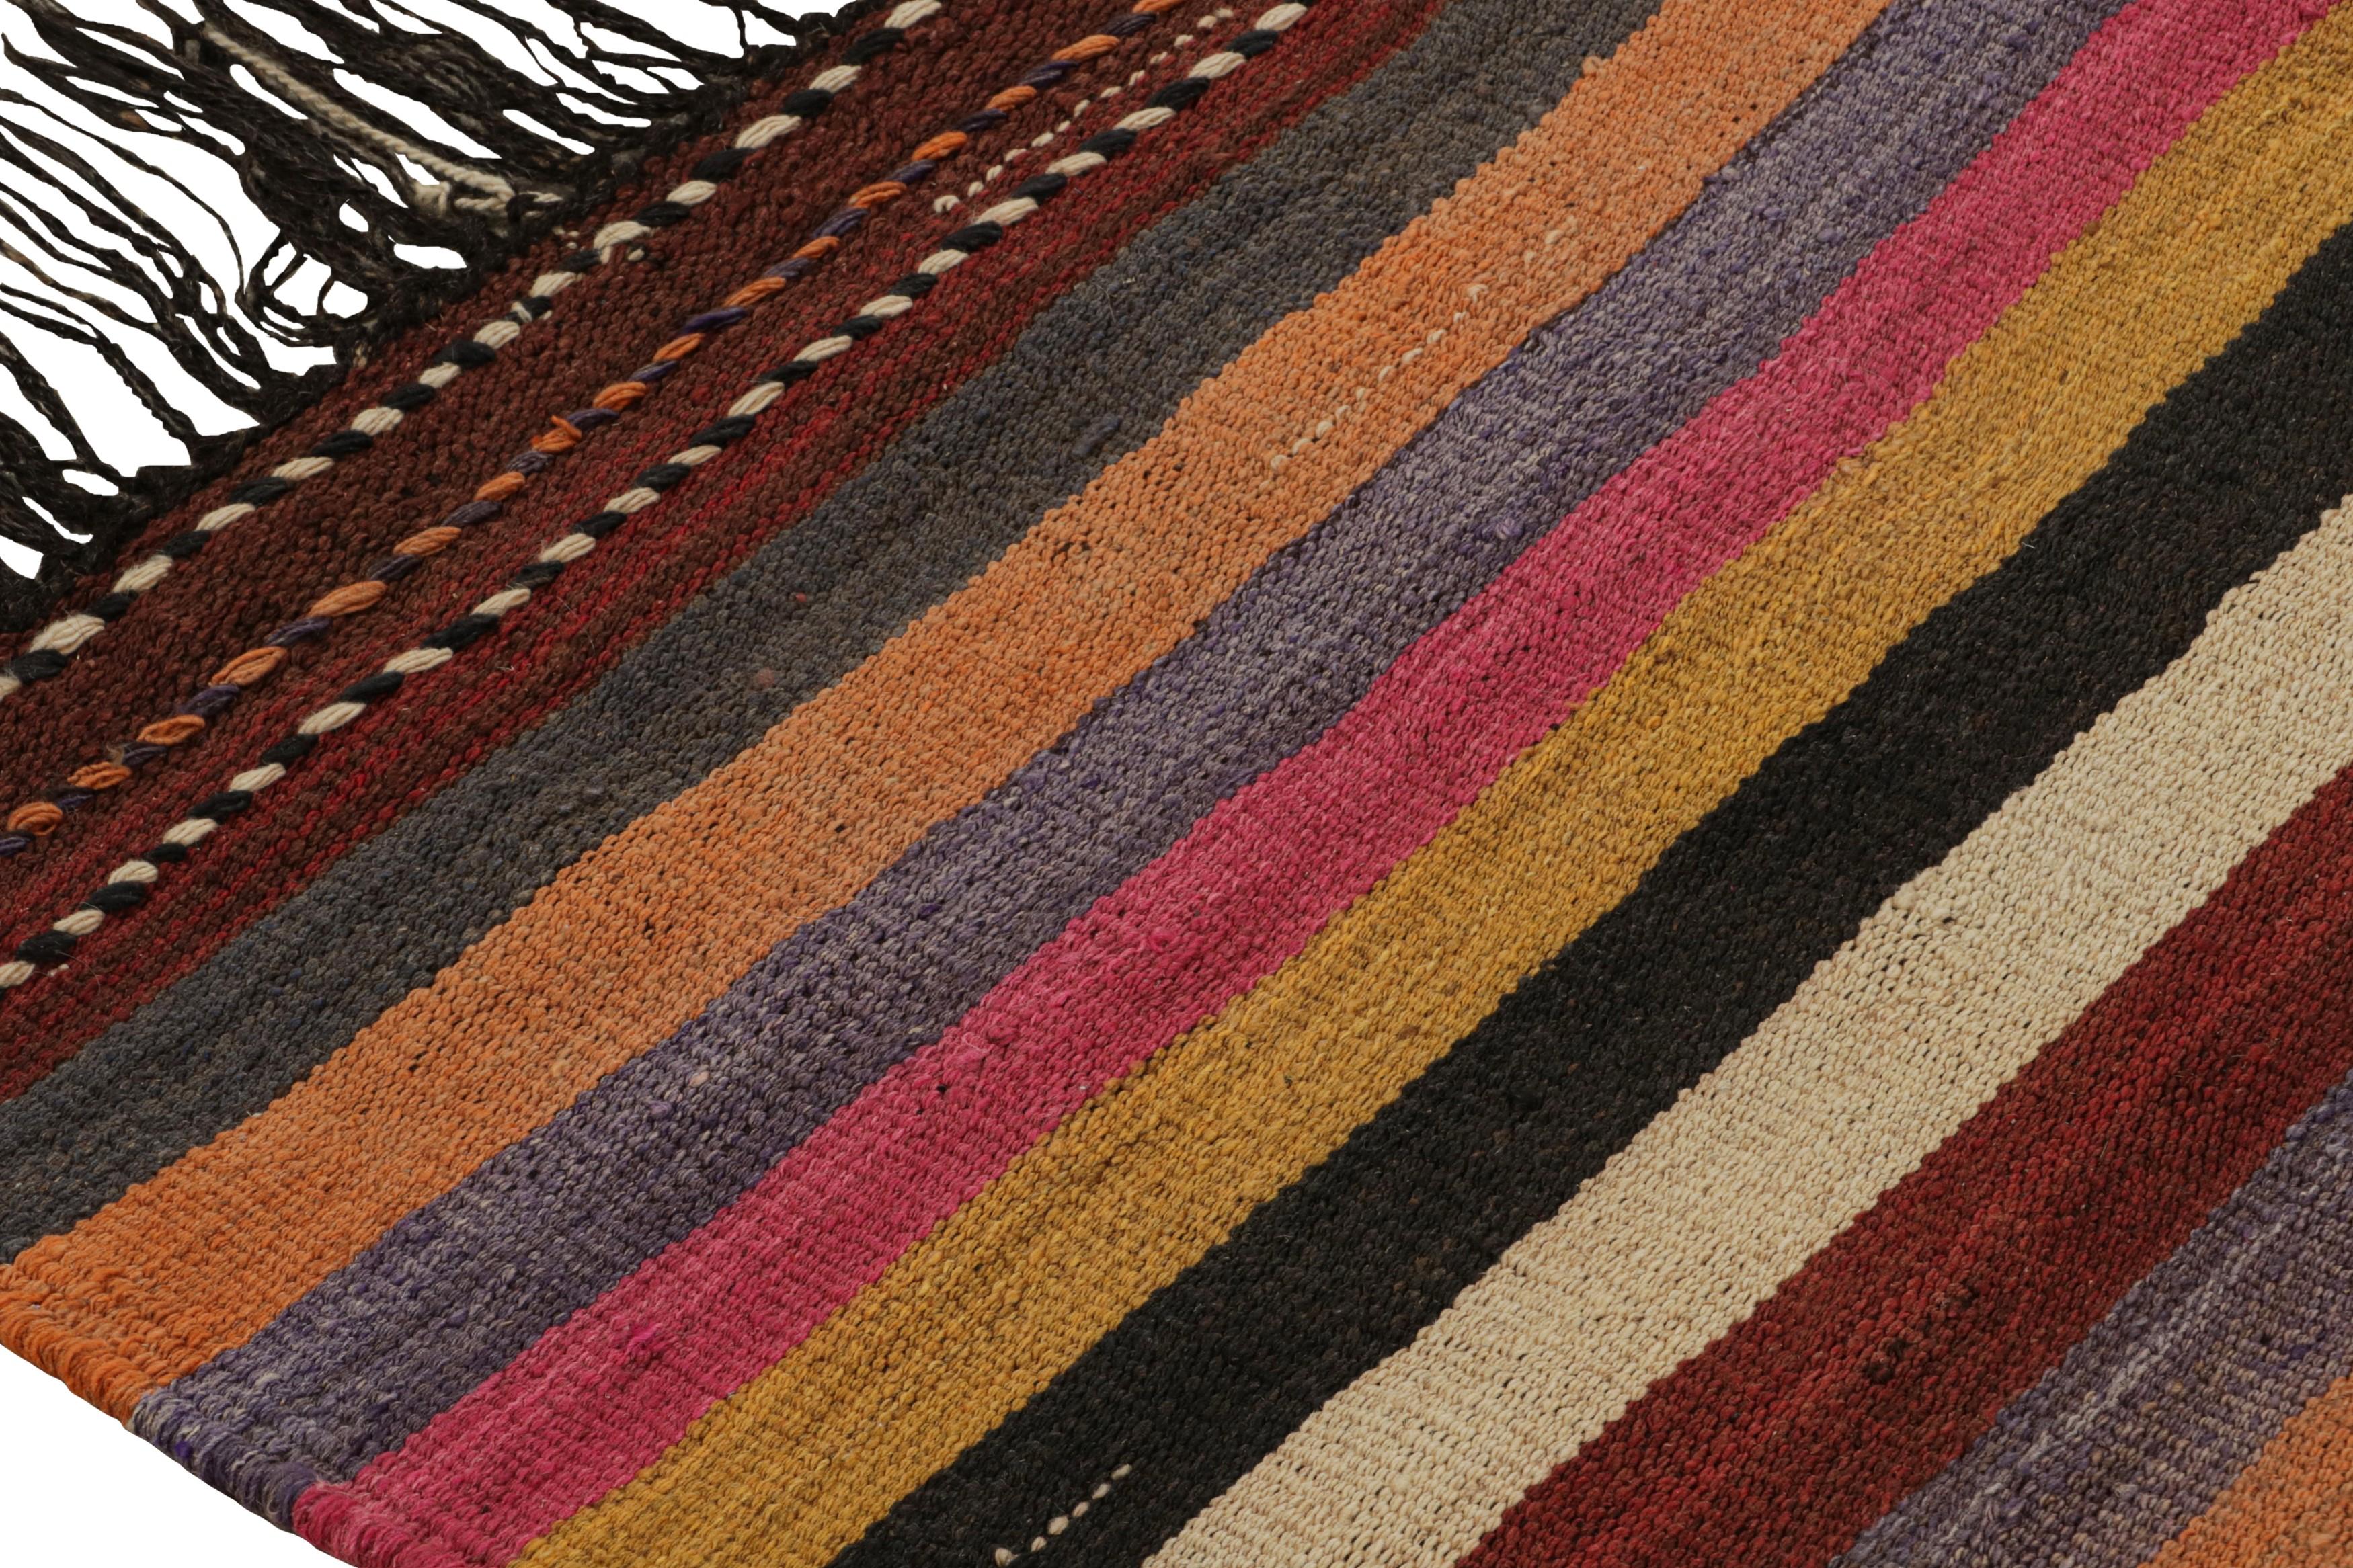 Vintage Afghani tribal Kilim runner rug, with Stripes, from Rug & Kilim In Good Condition For Sale In Long Island City, NY